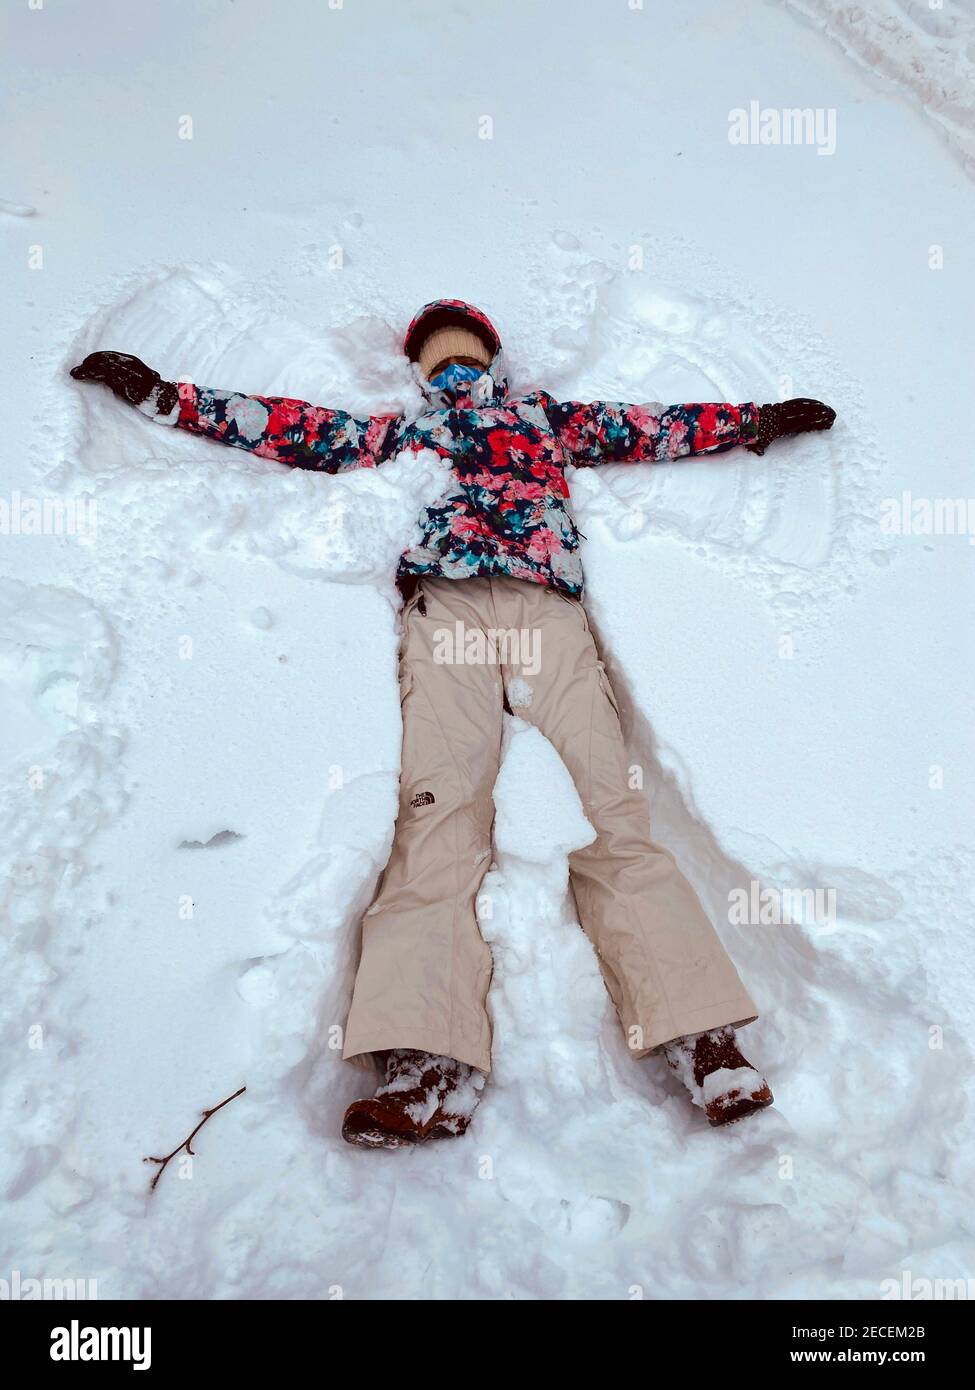 Snow angel with a face mask during the Covid-19 pandemic in Brooklyn, New York. Stock Photo